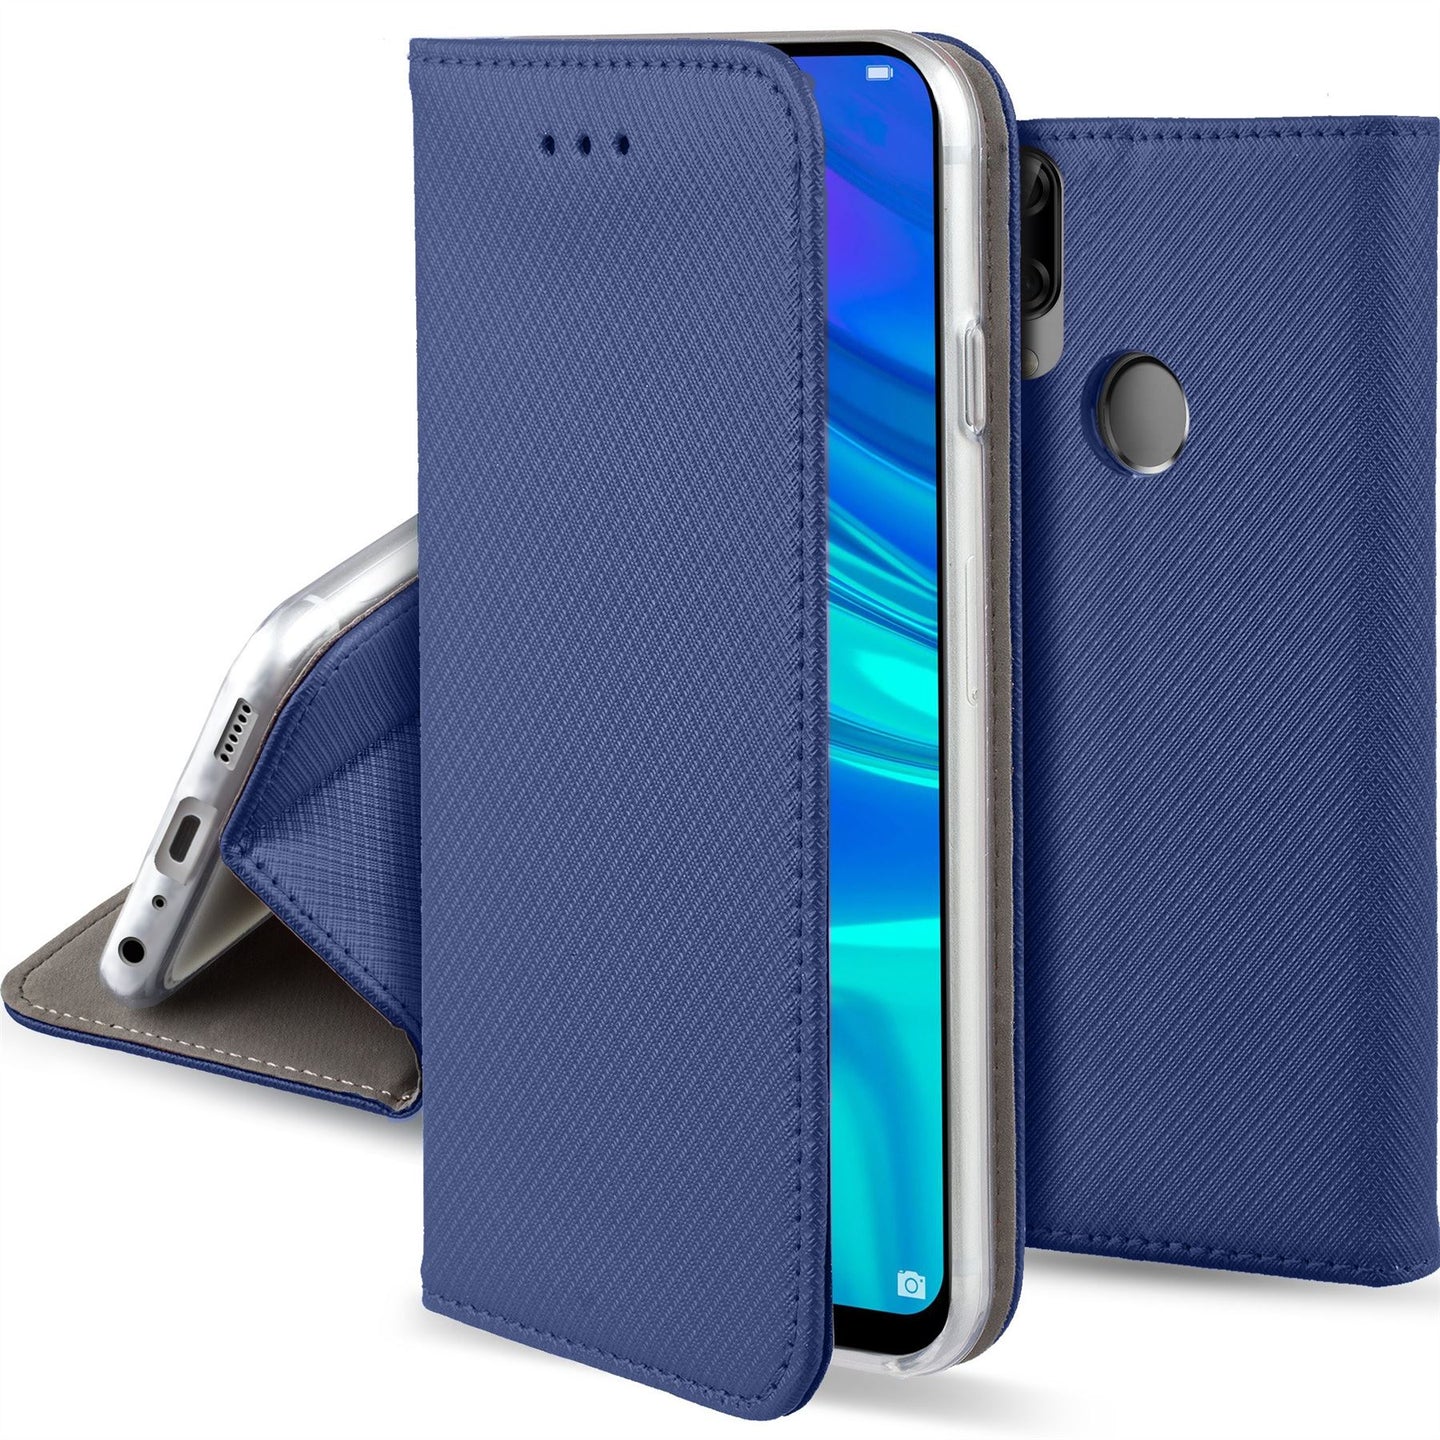 Moozy Case Flip Cover for Huawei P Smart 2019, Honor 10 Lite, Dark Blue - Smart Magnetic Flip Case with Card Holder and Stand